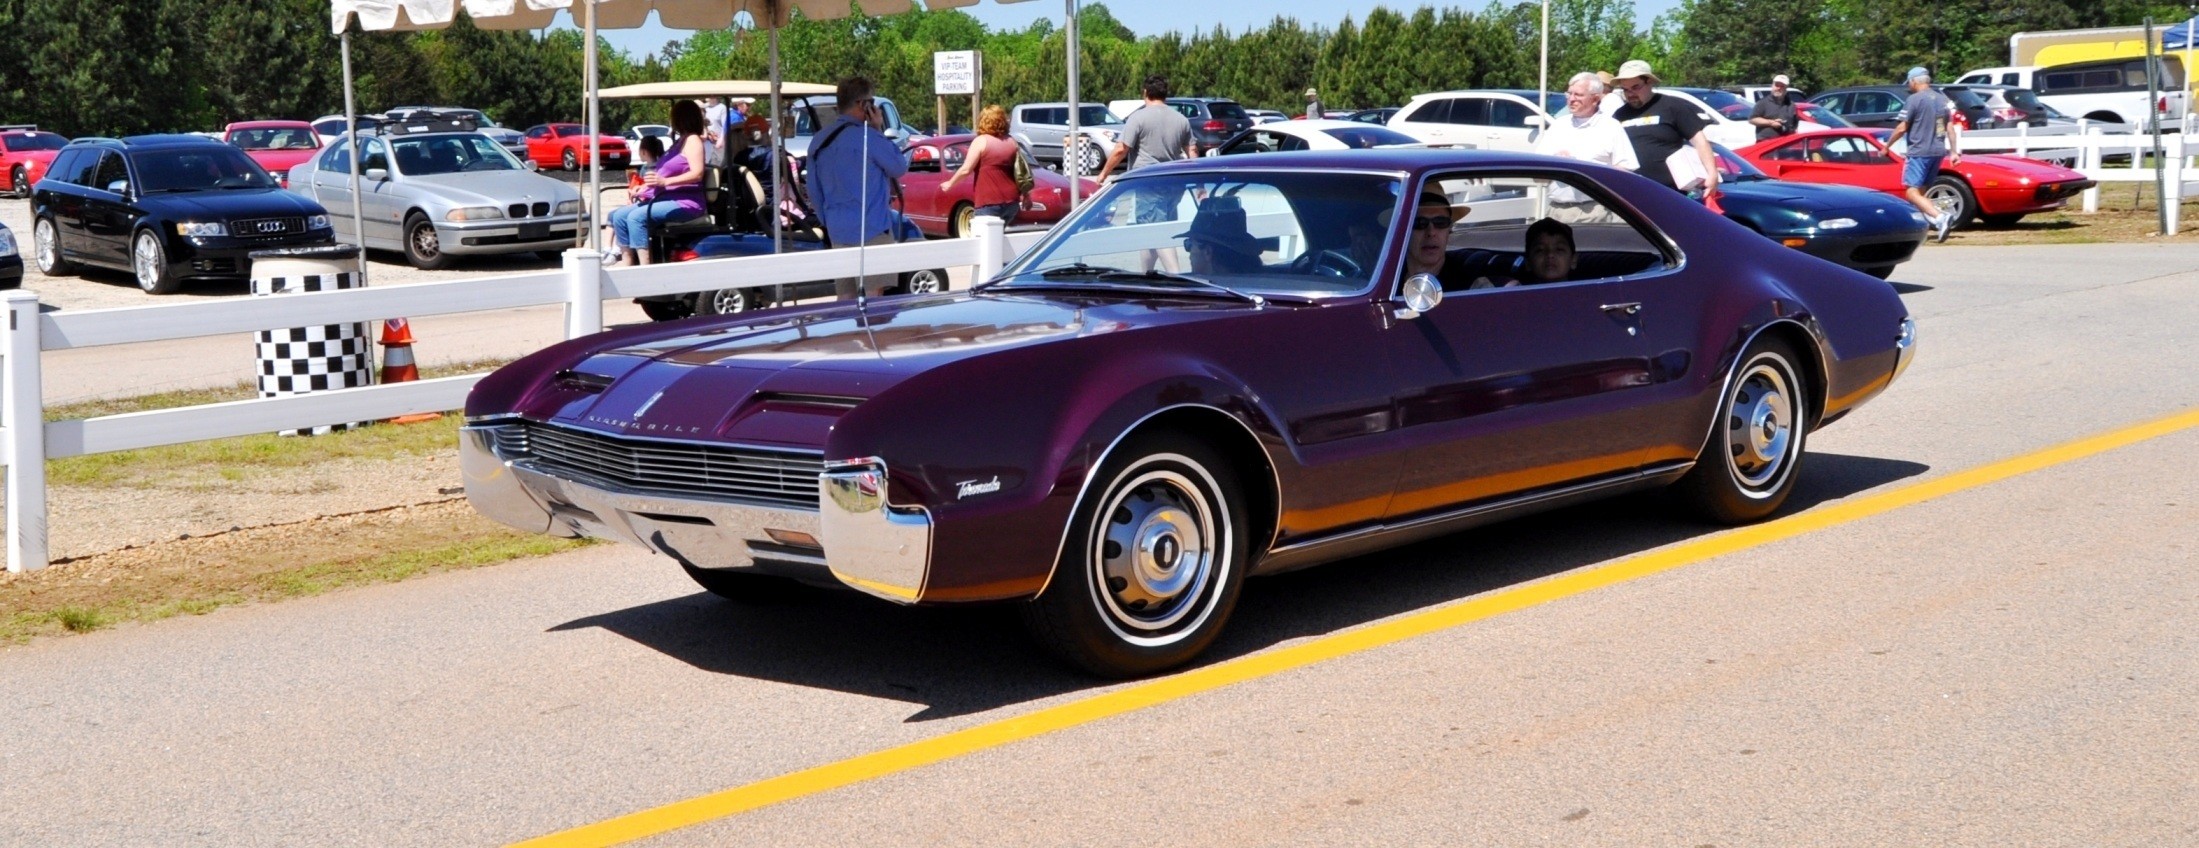 The-Mittys-Most-Curious-Parade-Lapper-1966-Oldsmobile-Toronado-in-Riddler-Purple-4.jpg